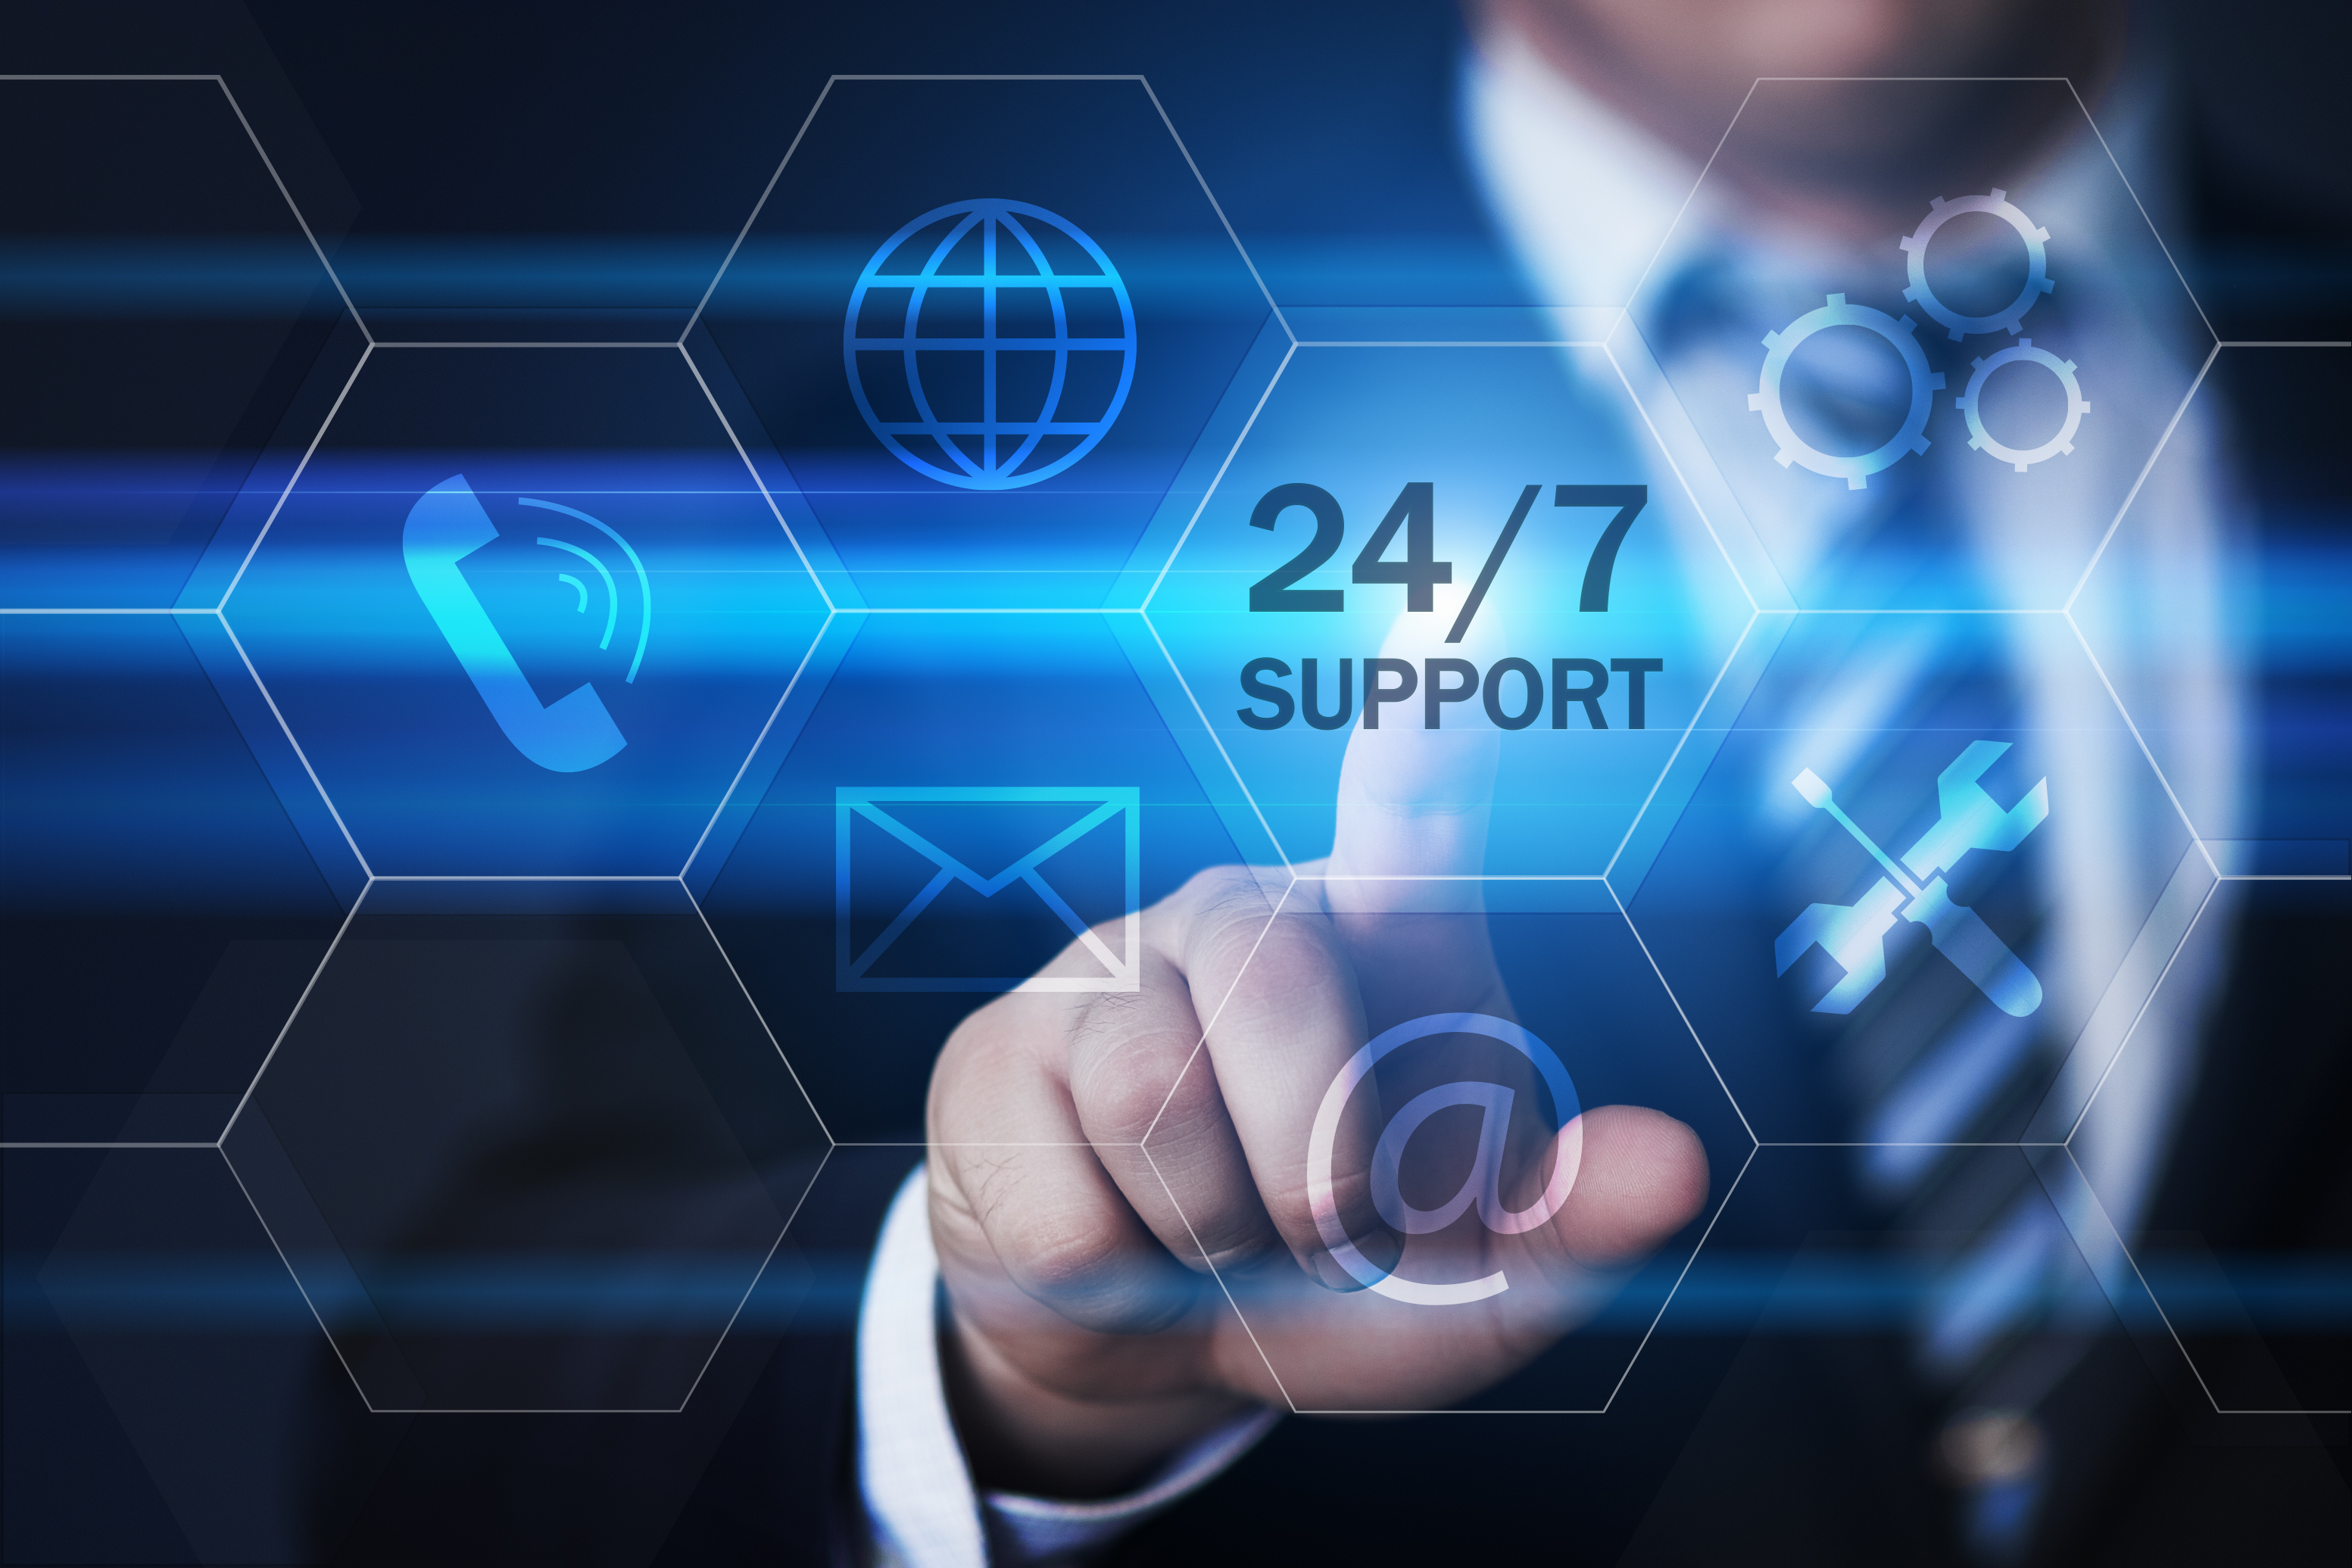 Things that go bump in the night – Is your business protected by 24/7 Support?